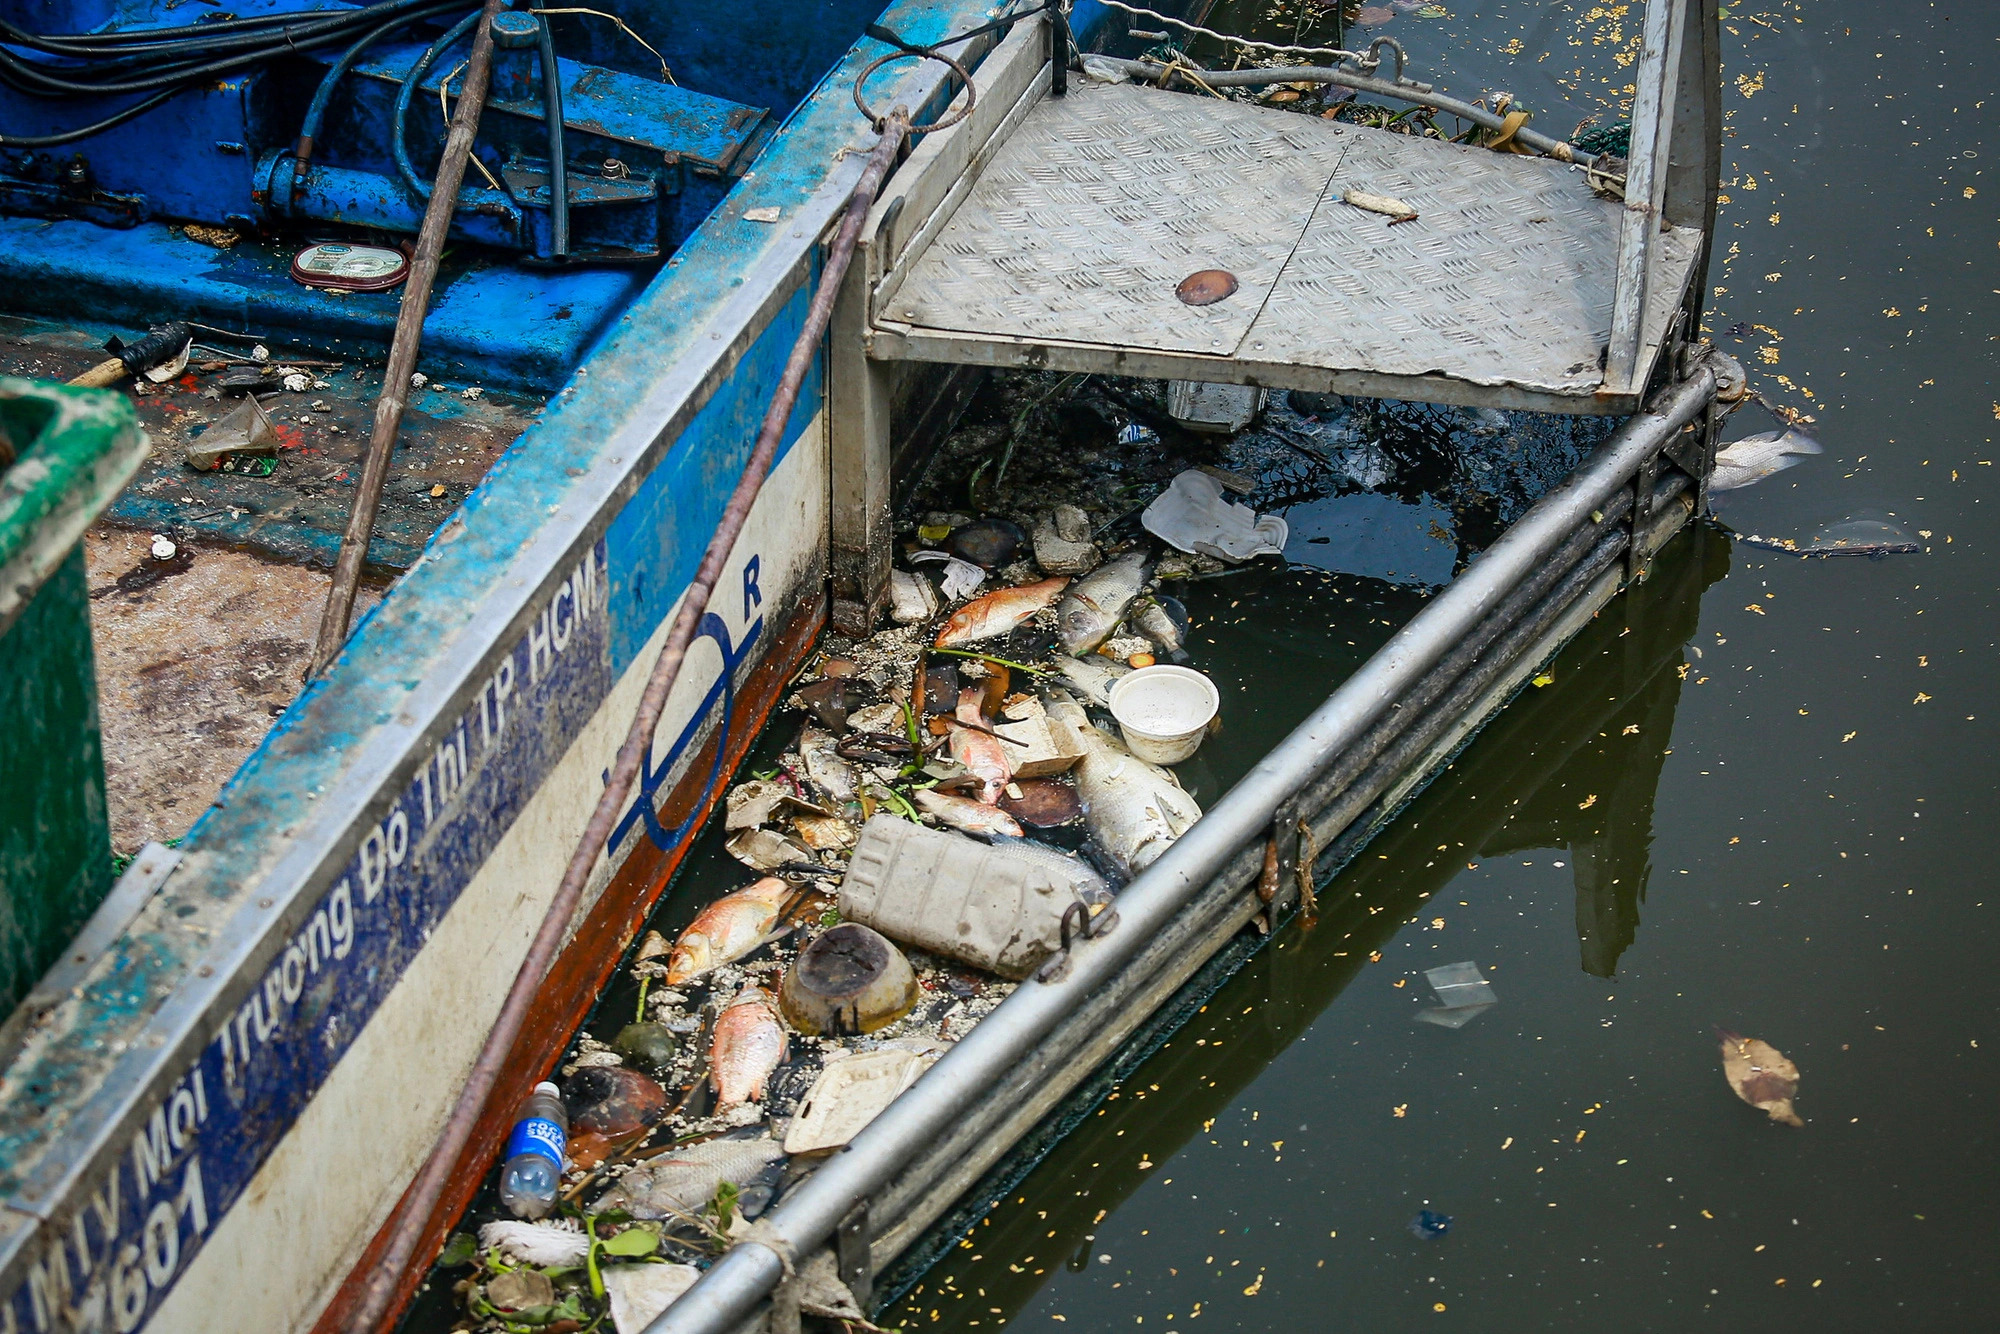 Sanitation workers have removed at least six metric tons of dead fish and garbage from the Nhieu Loc-Thi Nghe Canal in Ho Chi Minh City. Photo: Chau Tuan / Tuoi Tre